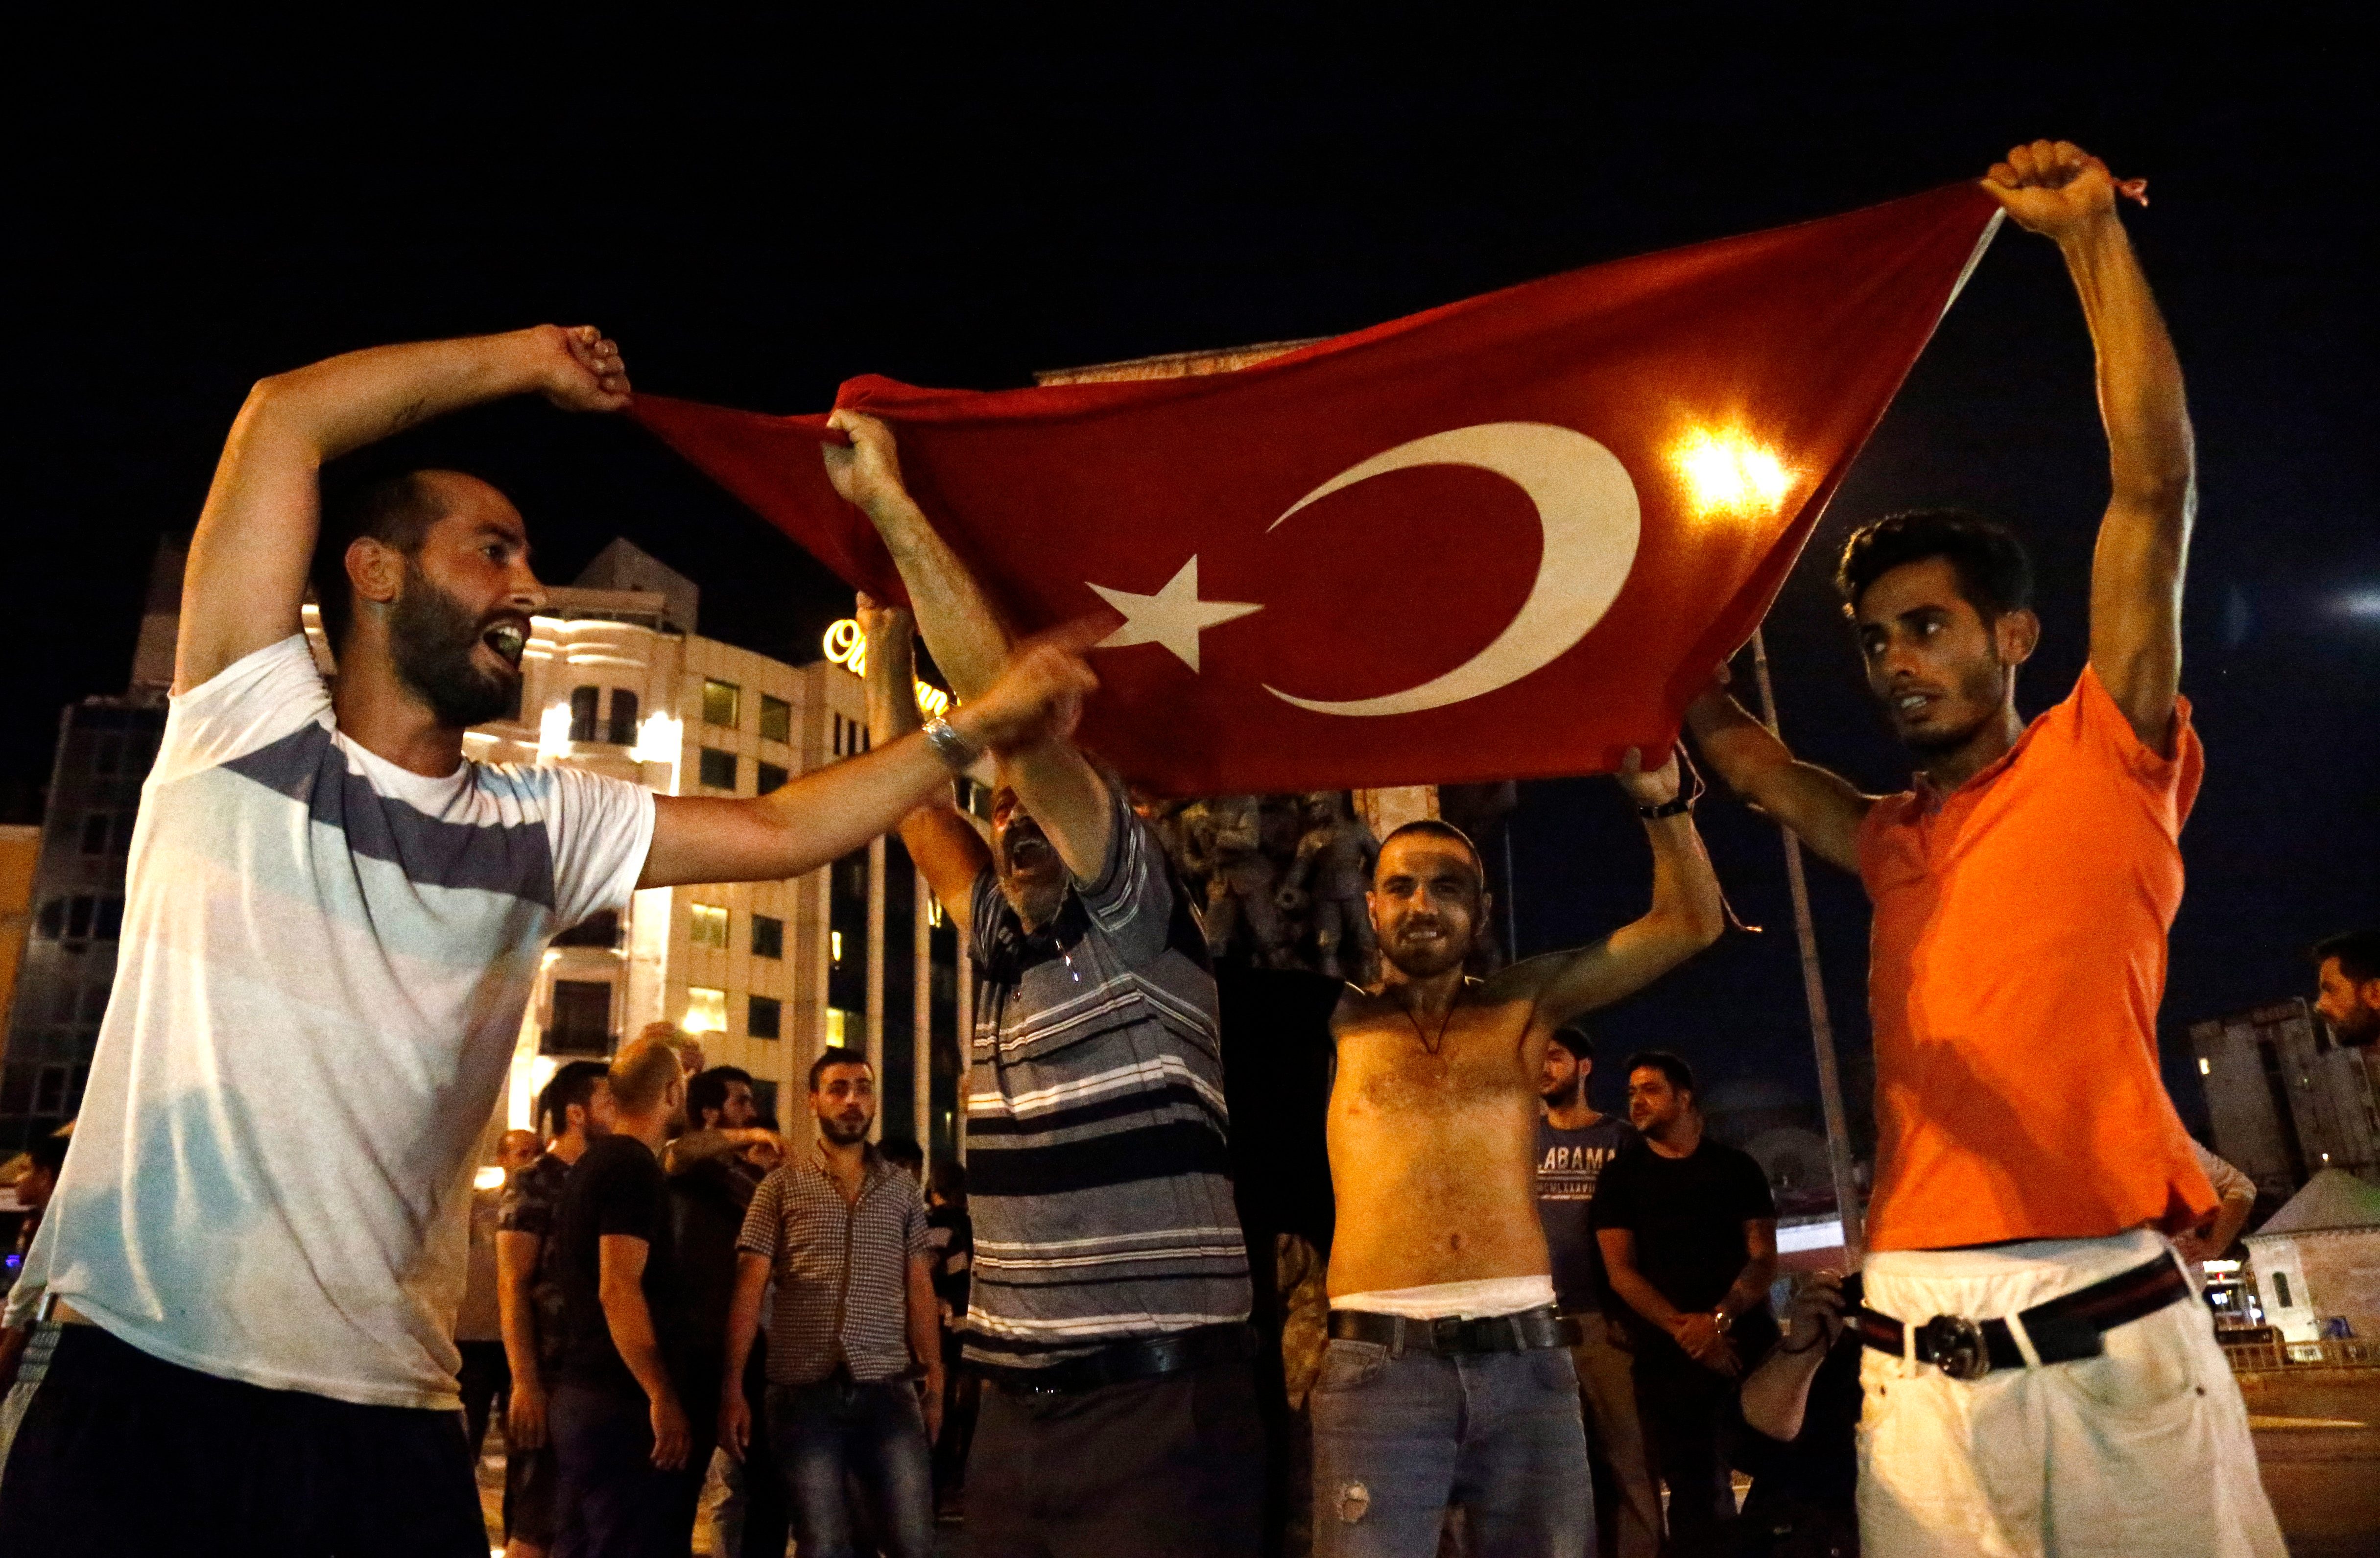 FOR ERDOGAN. Supporters of Recep Tayyip Erdogan shout slogans at the Taksim Square in Istanbul. Photo by Sedat Suna/EPA  